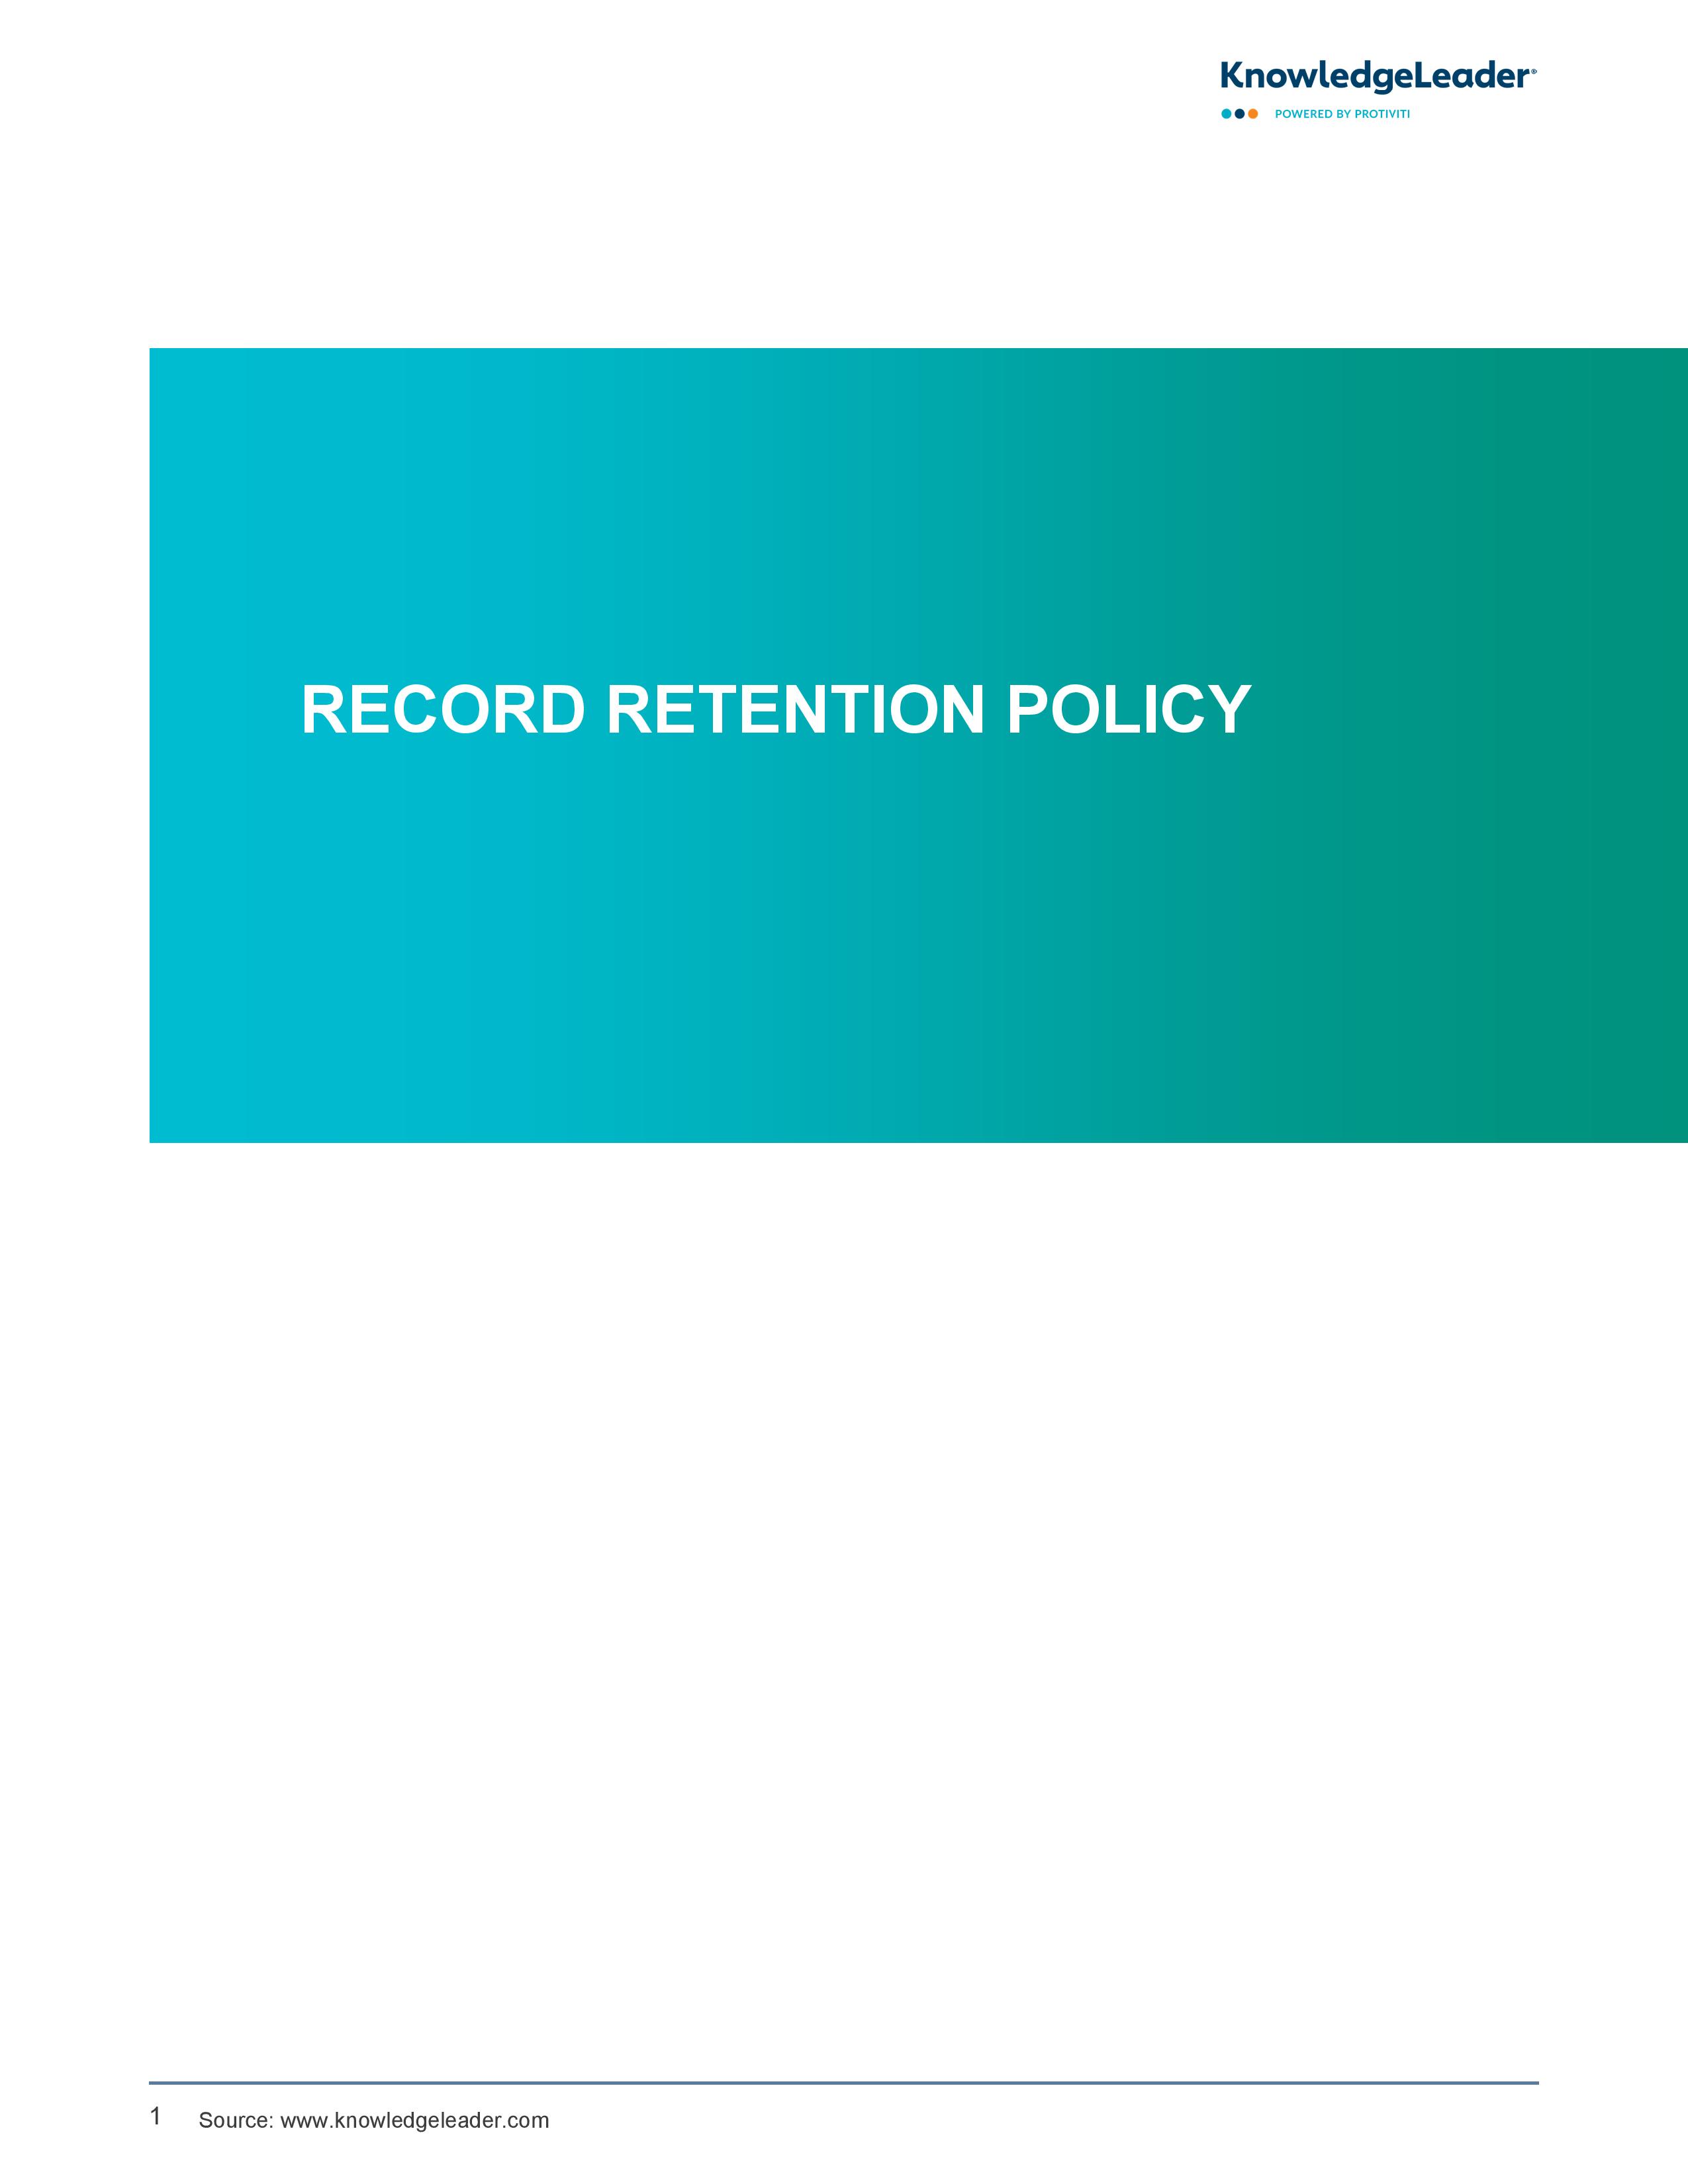 Screenshot of the first page of Record Retention Policy